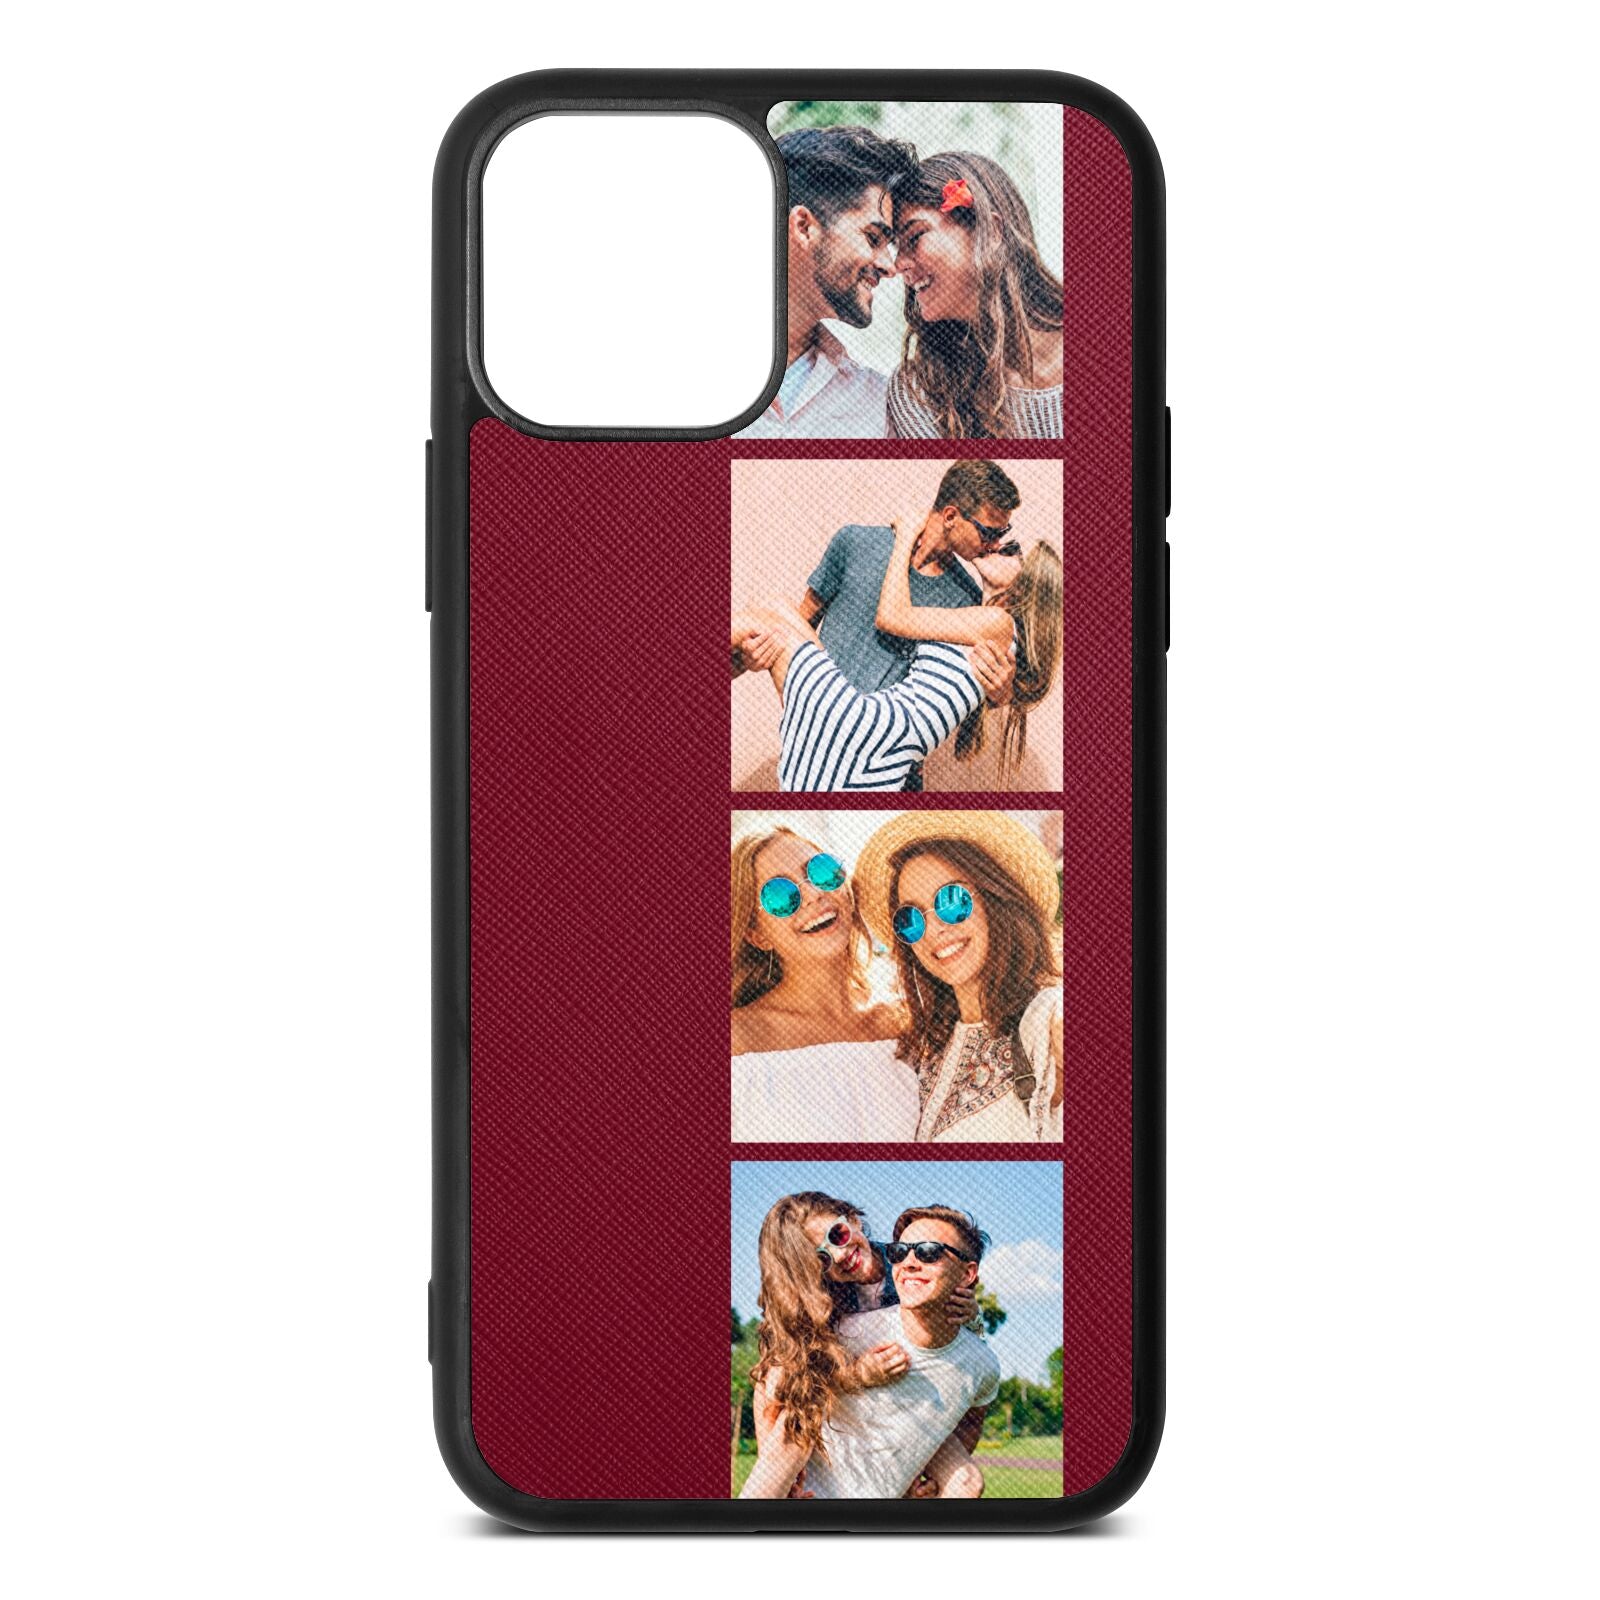 Photo Strip Montage Upload Wine Red Saffiano Leather iPhone 11 Pro Case